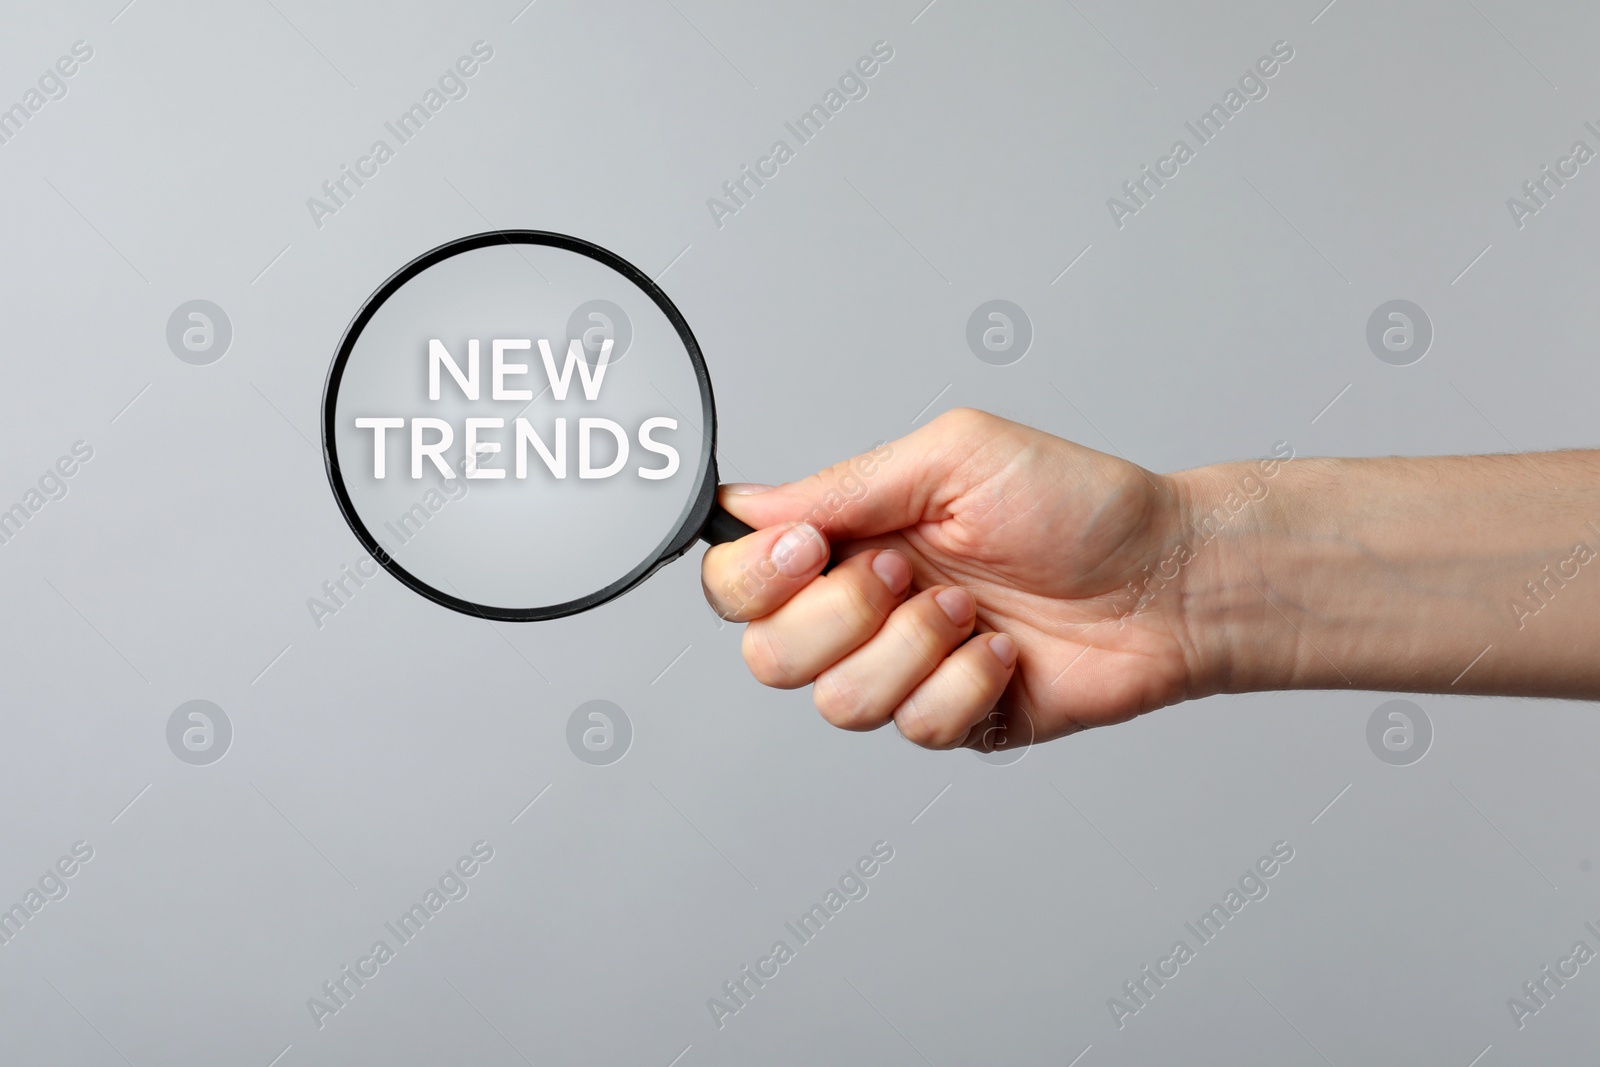 Image of Searching new and popular trends. Woman holding magnifying glass over words on grey background, closeup